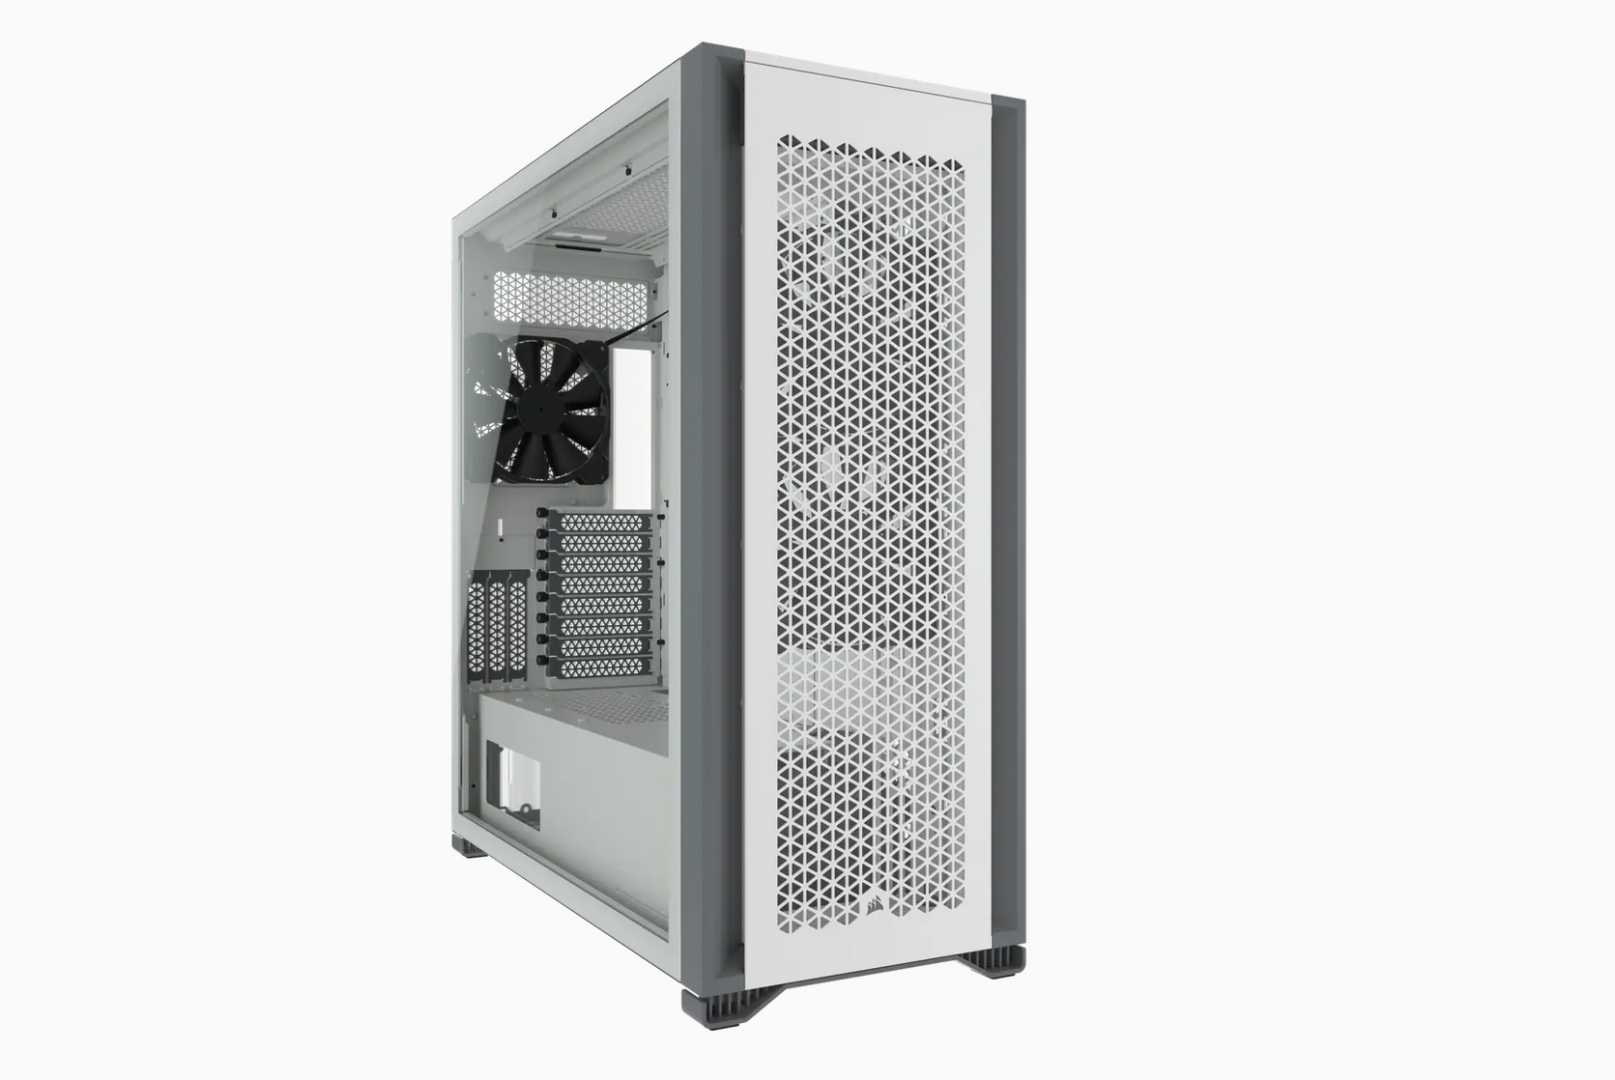 Carcasa Corsair 7000D AIRFLOW Full-Tower ATX PC Case — White  Maximum GPU Length 450 mm Maximum PSU Length 225 mm Maximum CPU Cooler Height 190 mm Expansion Slots 8 horizontal + 3 vertical Case Drive Bays (x6) 3.5in (x4) 2.5in Form Factor FULL TOWER Case Windowed Tempered Glass Case Warranty 2 Year